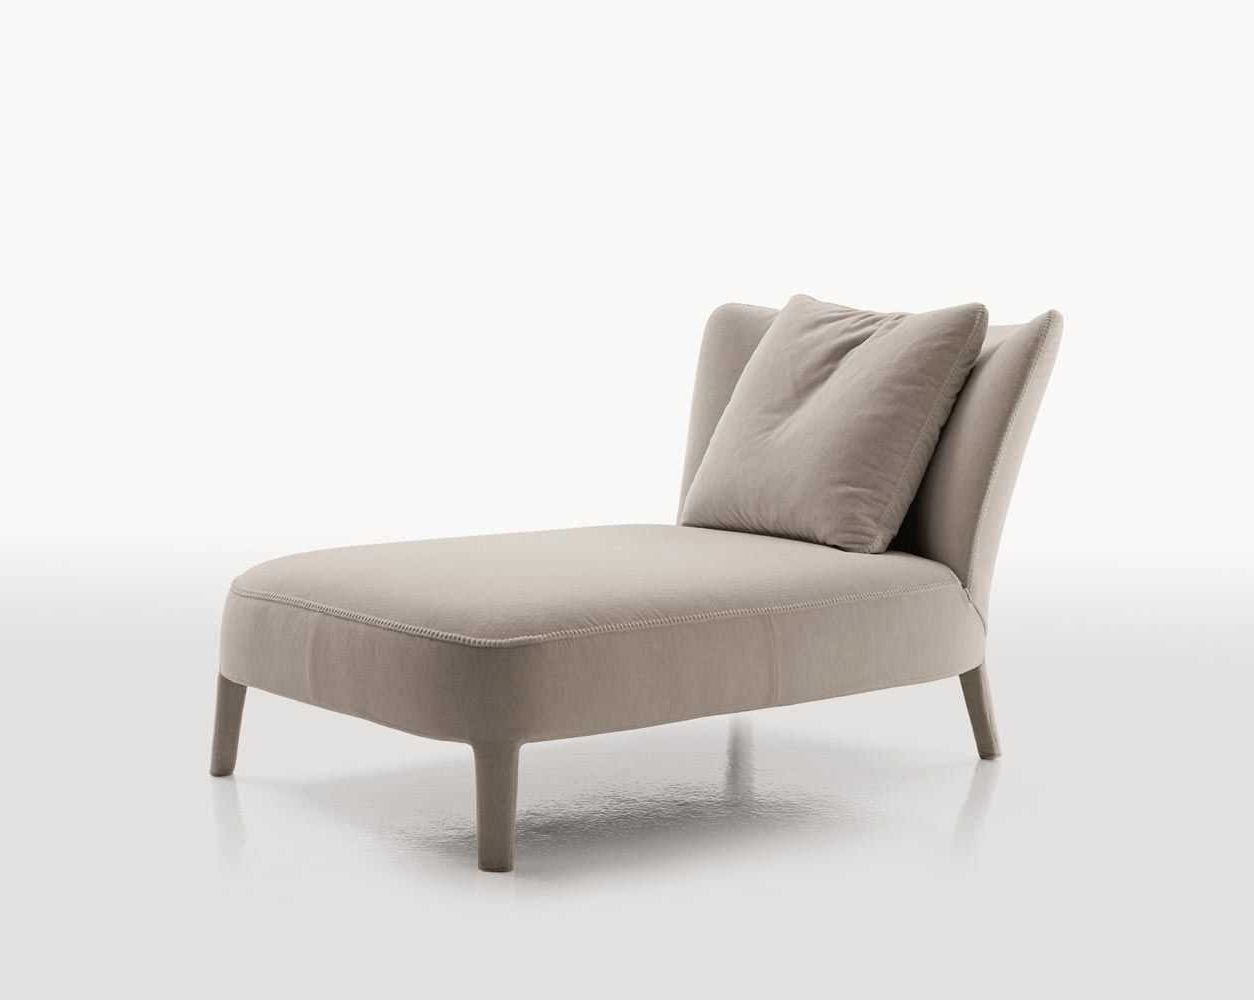 Widely Used Small Chaise Lounge Chairs For Ideas And Beautiful Bedroom Pertaining To Small Chaise Lounge Chairs For Bedroom (View 1 of 15)